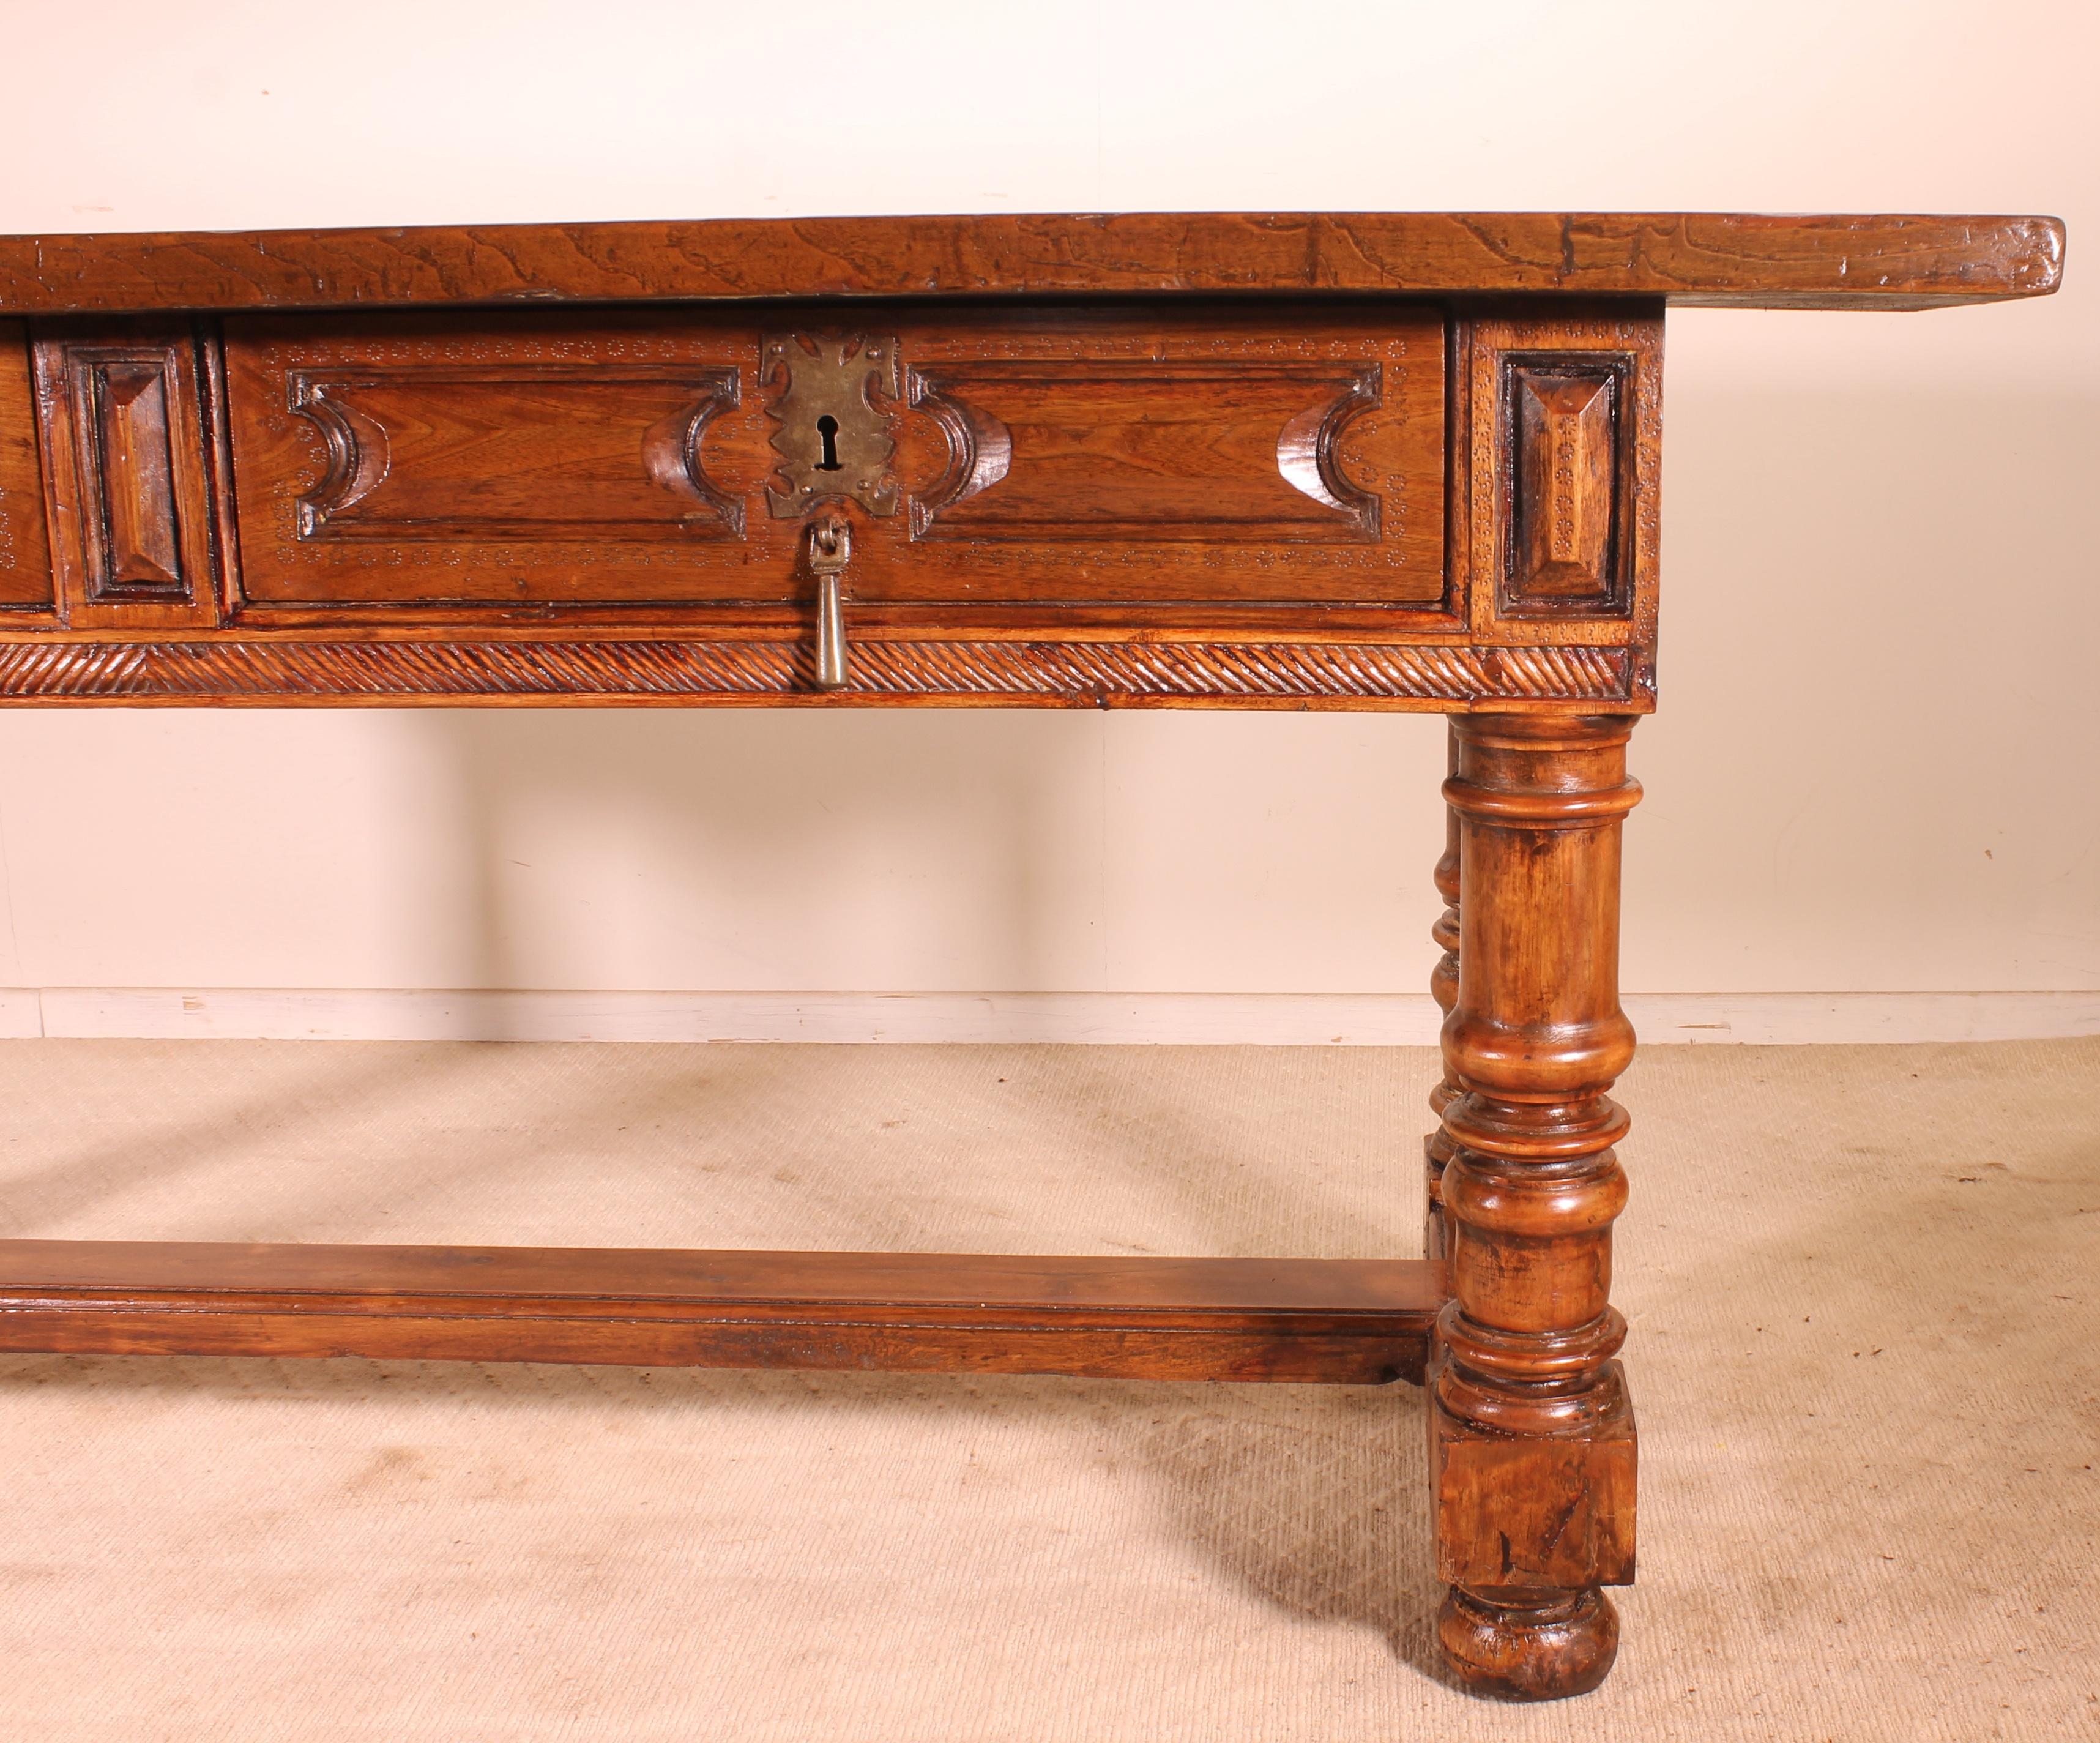 Superb Spanish Table in walnut and chestnut of the end of the 16th century of the Spanish renaissance which has two drawers with his original handles as well as original locks.
Superb fine sculptures and presence of small floral motifs on all the